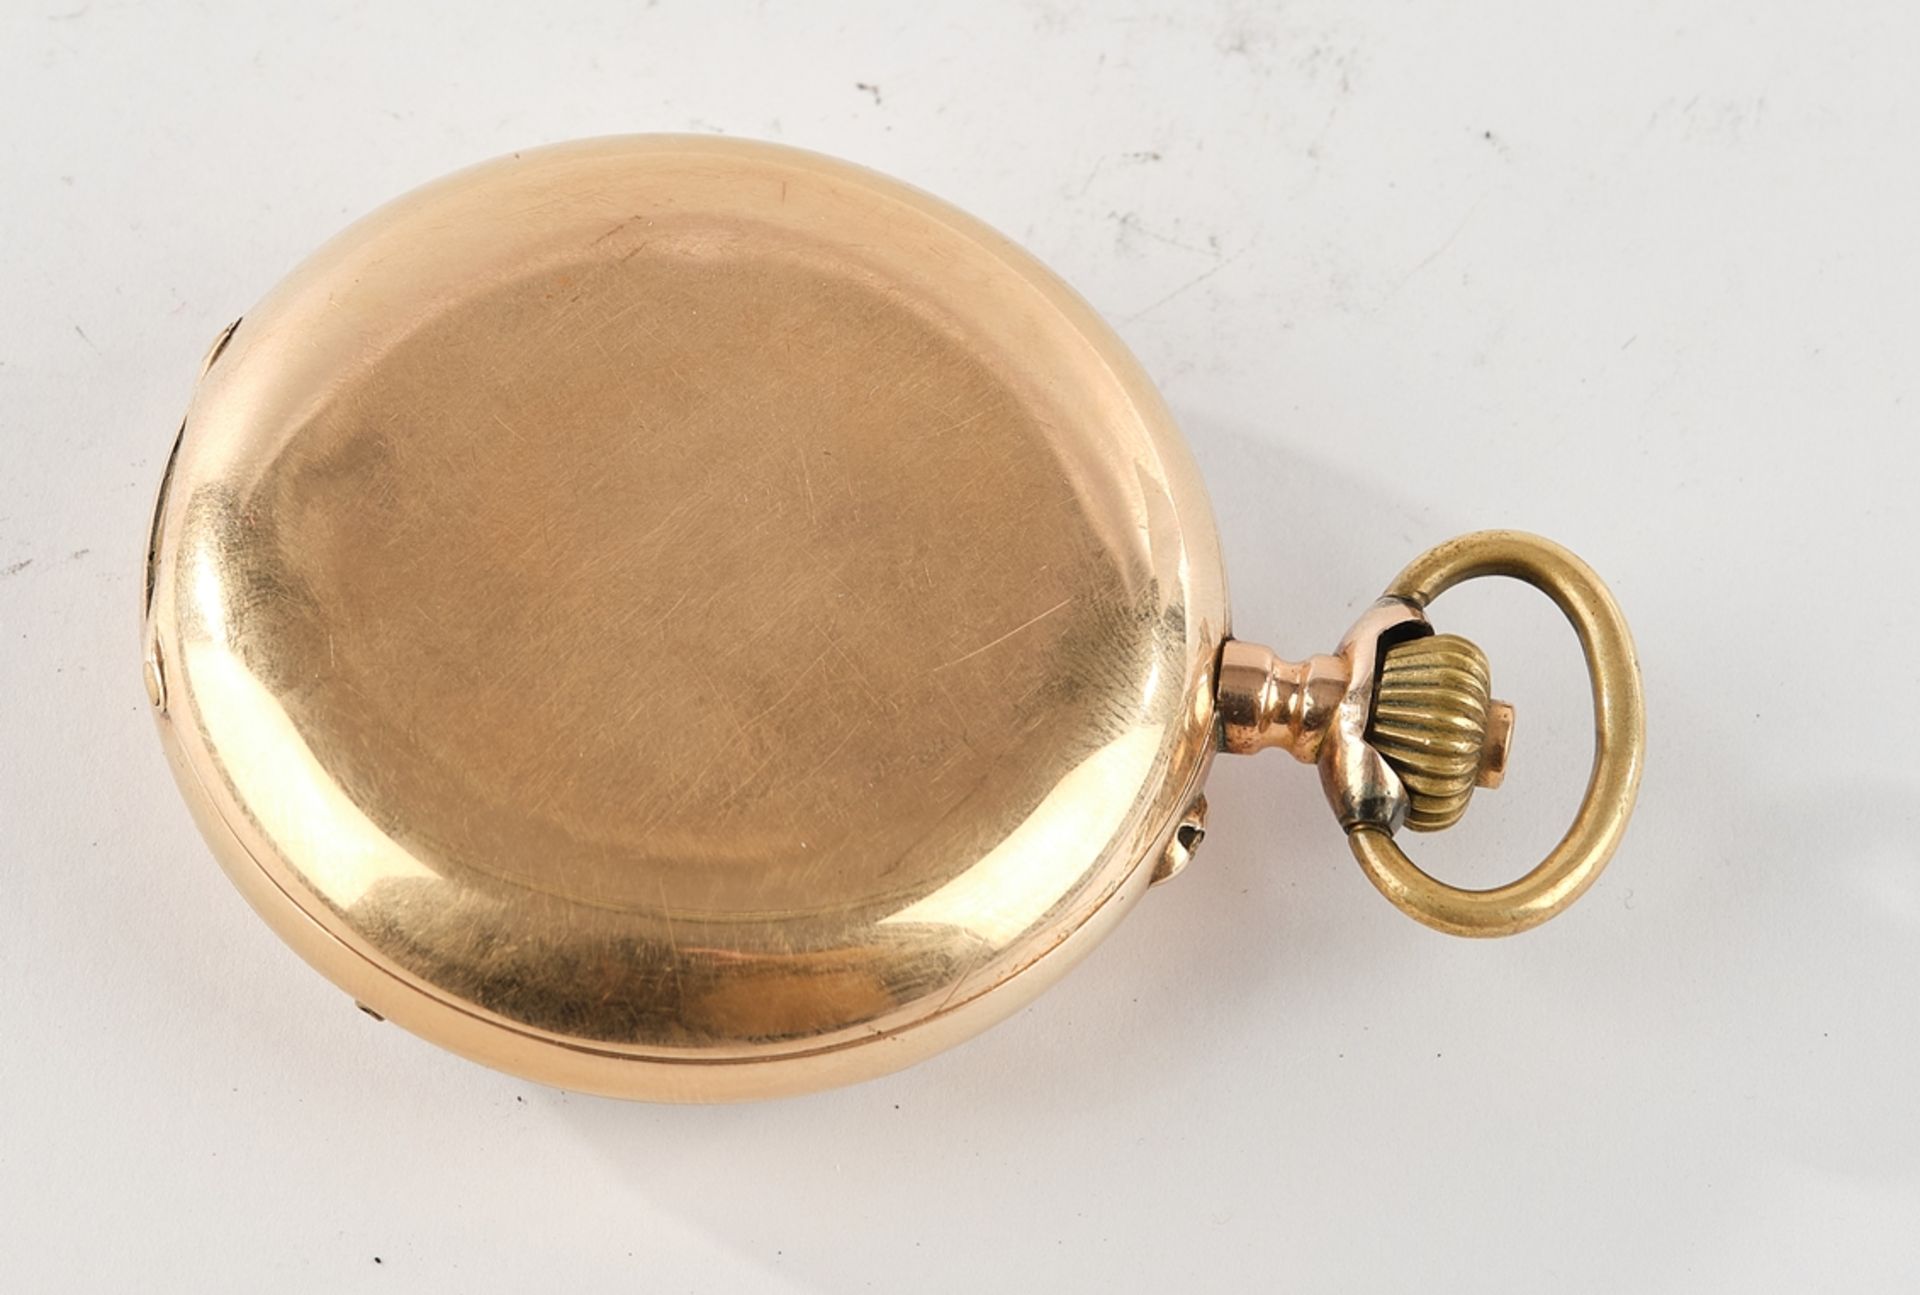 Calendar pocket watch, Switzerland, circa 1905, marked "Calendrier Brevete", rose gold 585 case, wh - Image 2 of 3